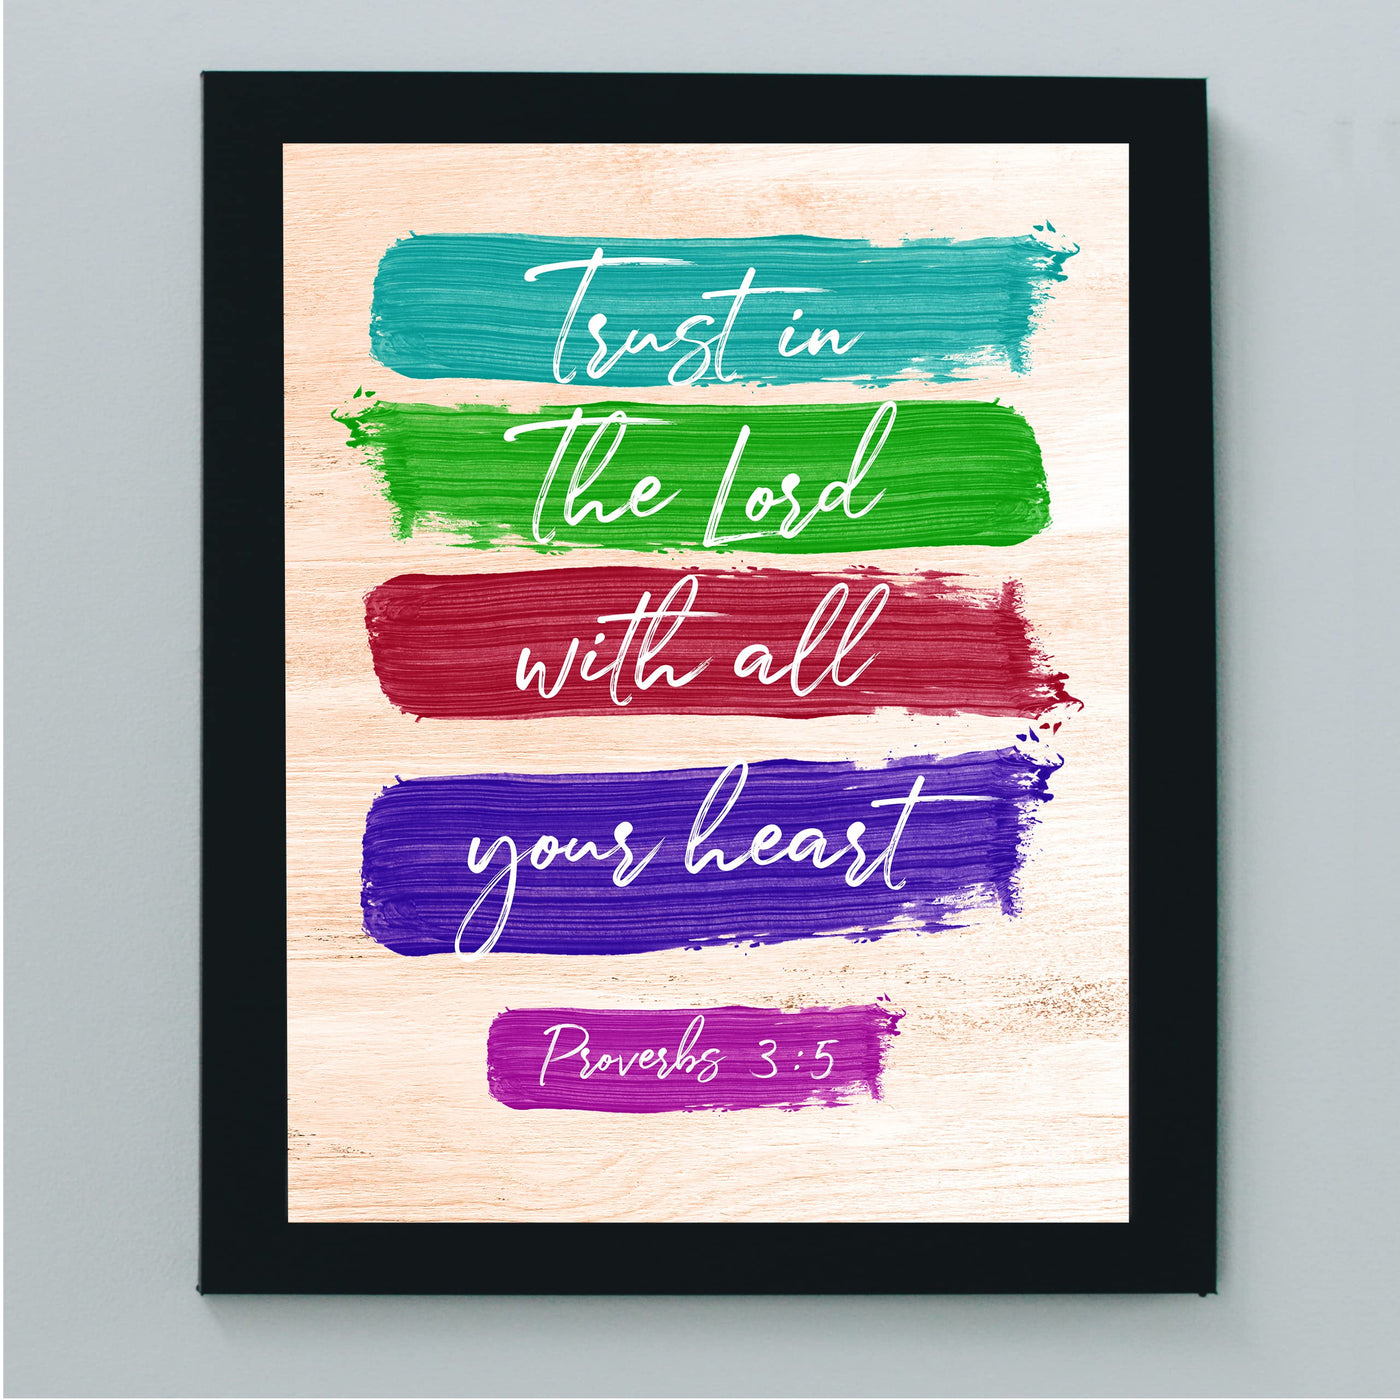 Trust In the Lord With All Your Heart- Bible Verse Wall Art -8 x 10" Scripture Painting Design Print -Ready to Frame. Inspirational Home-Office-Church Decor. Great Religious Gift! Proverbs 3:5